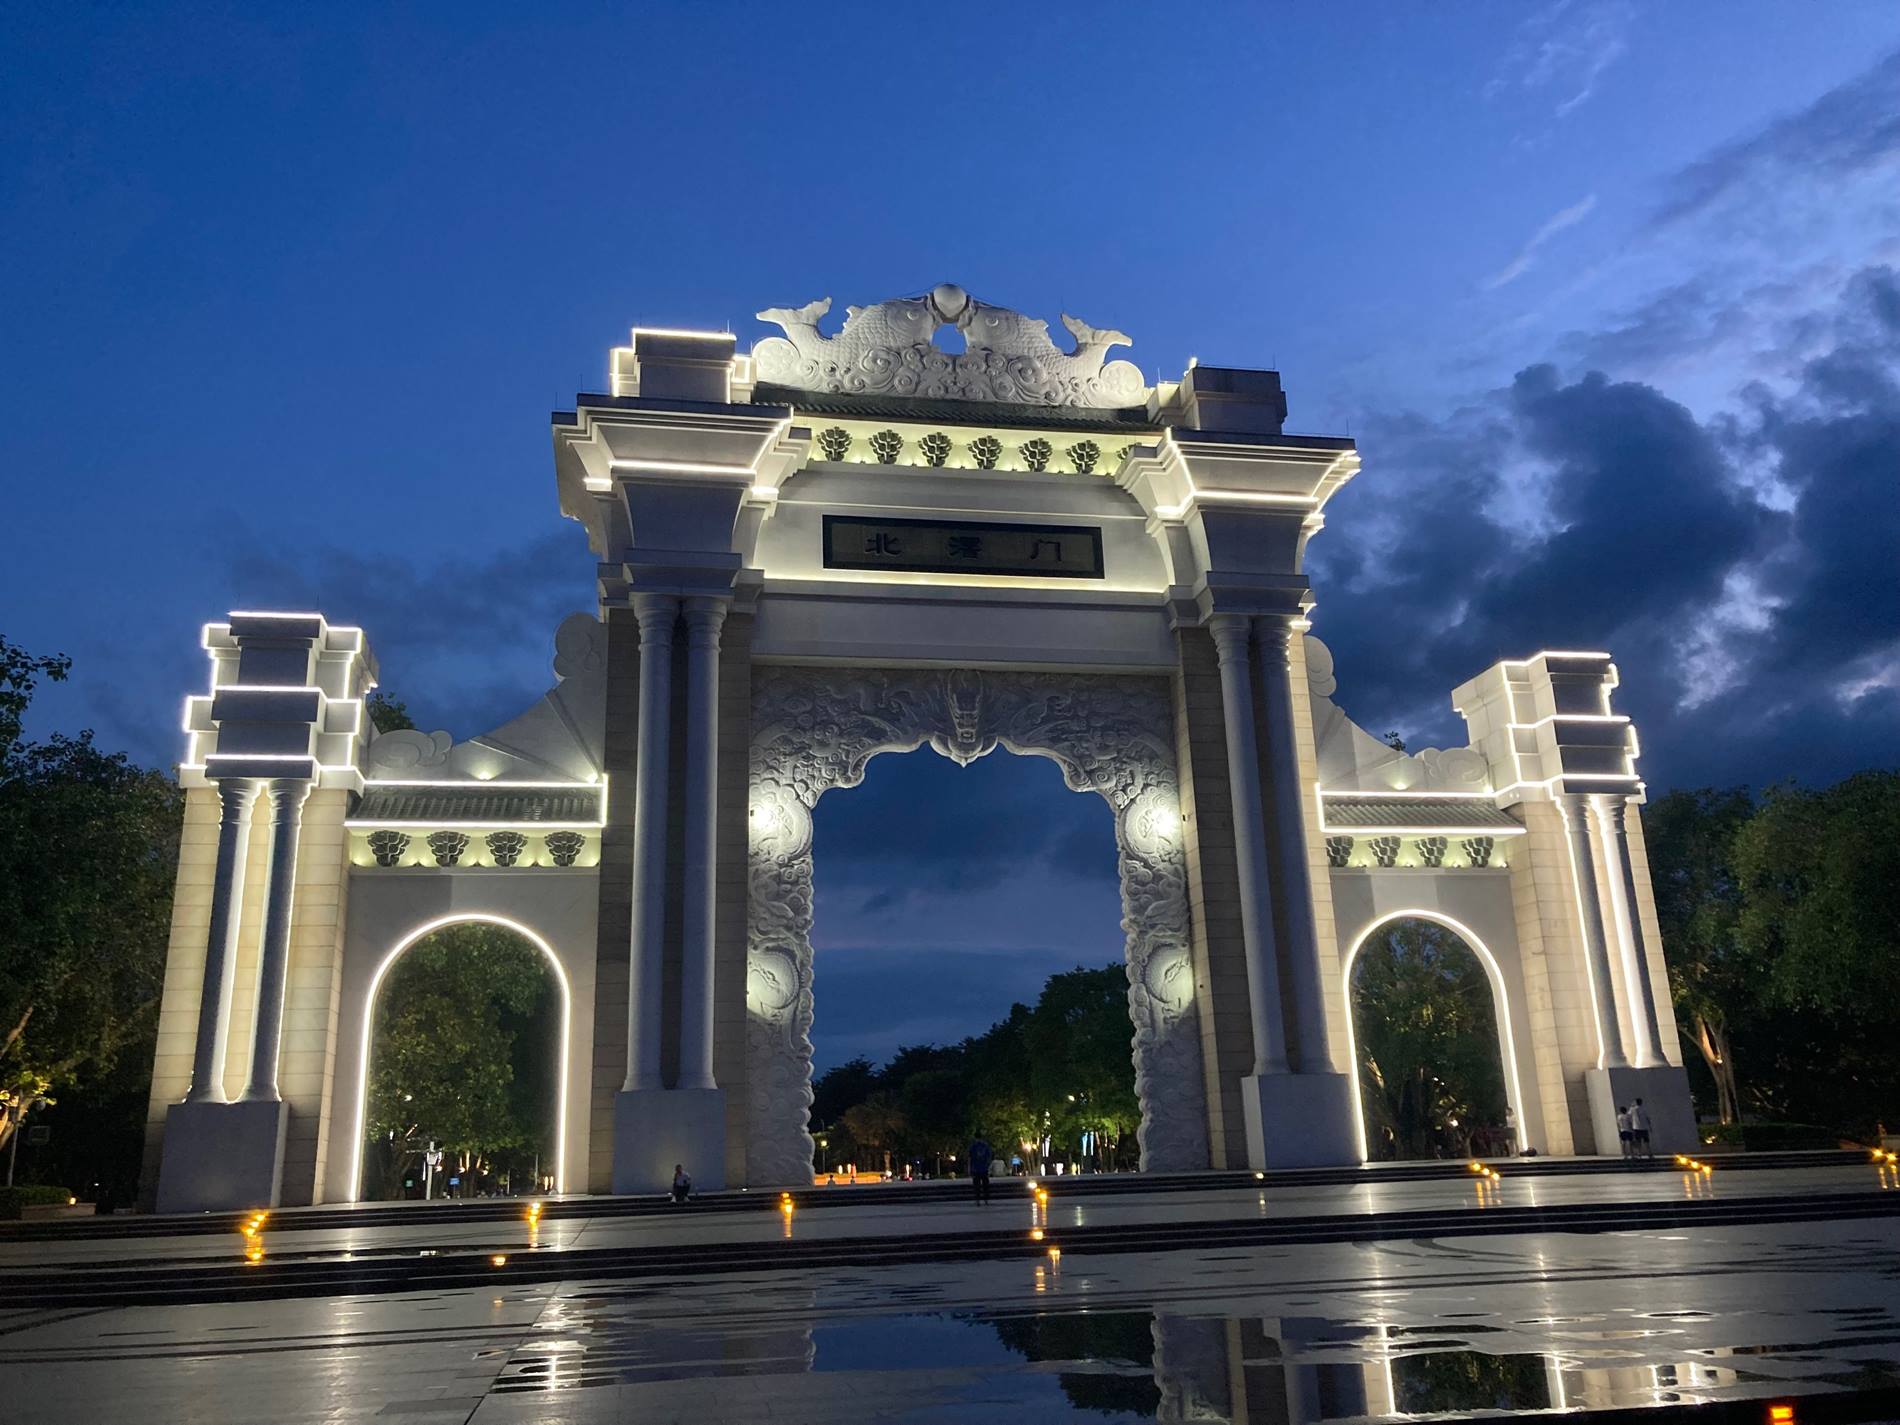 Archway in downtown Shunde